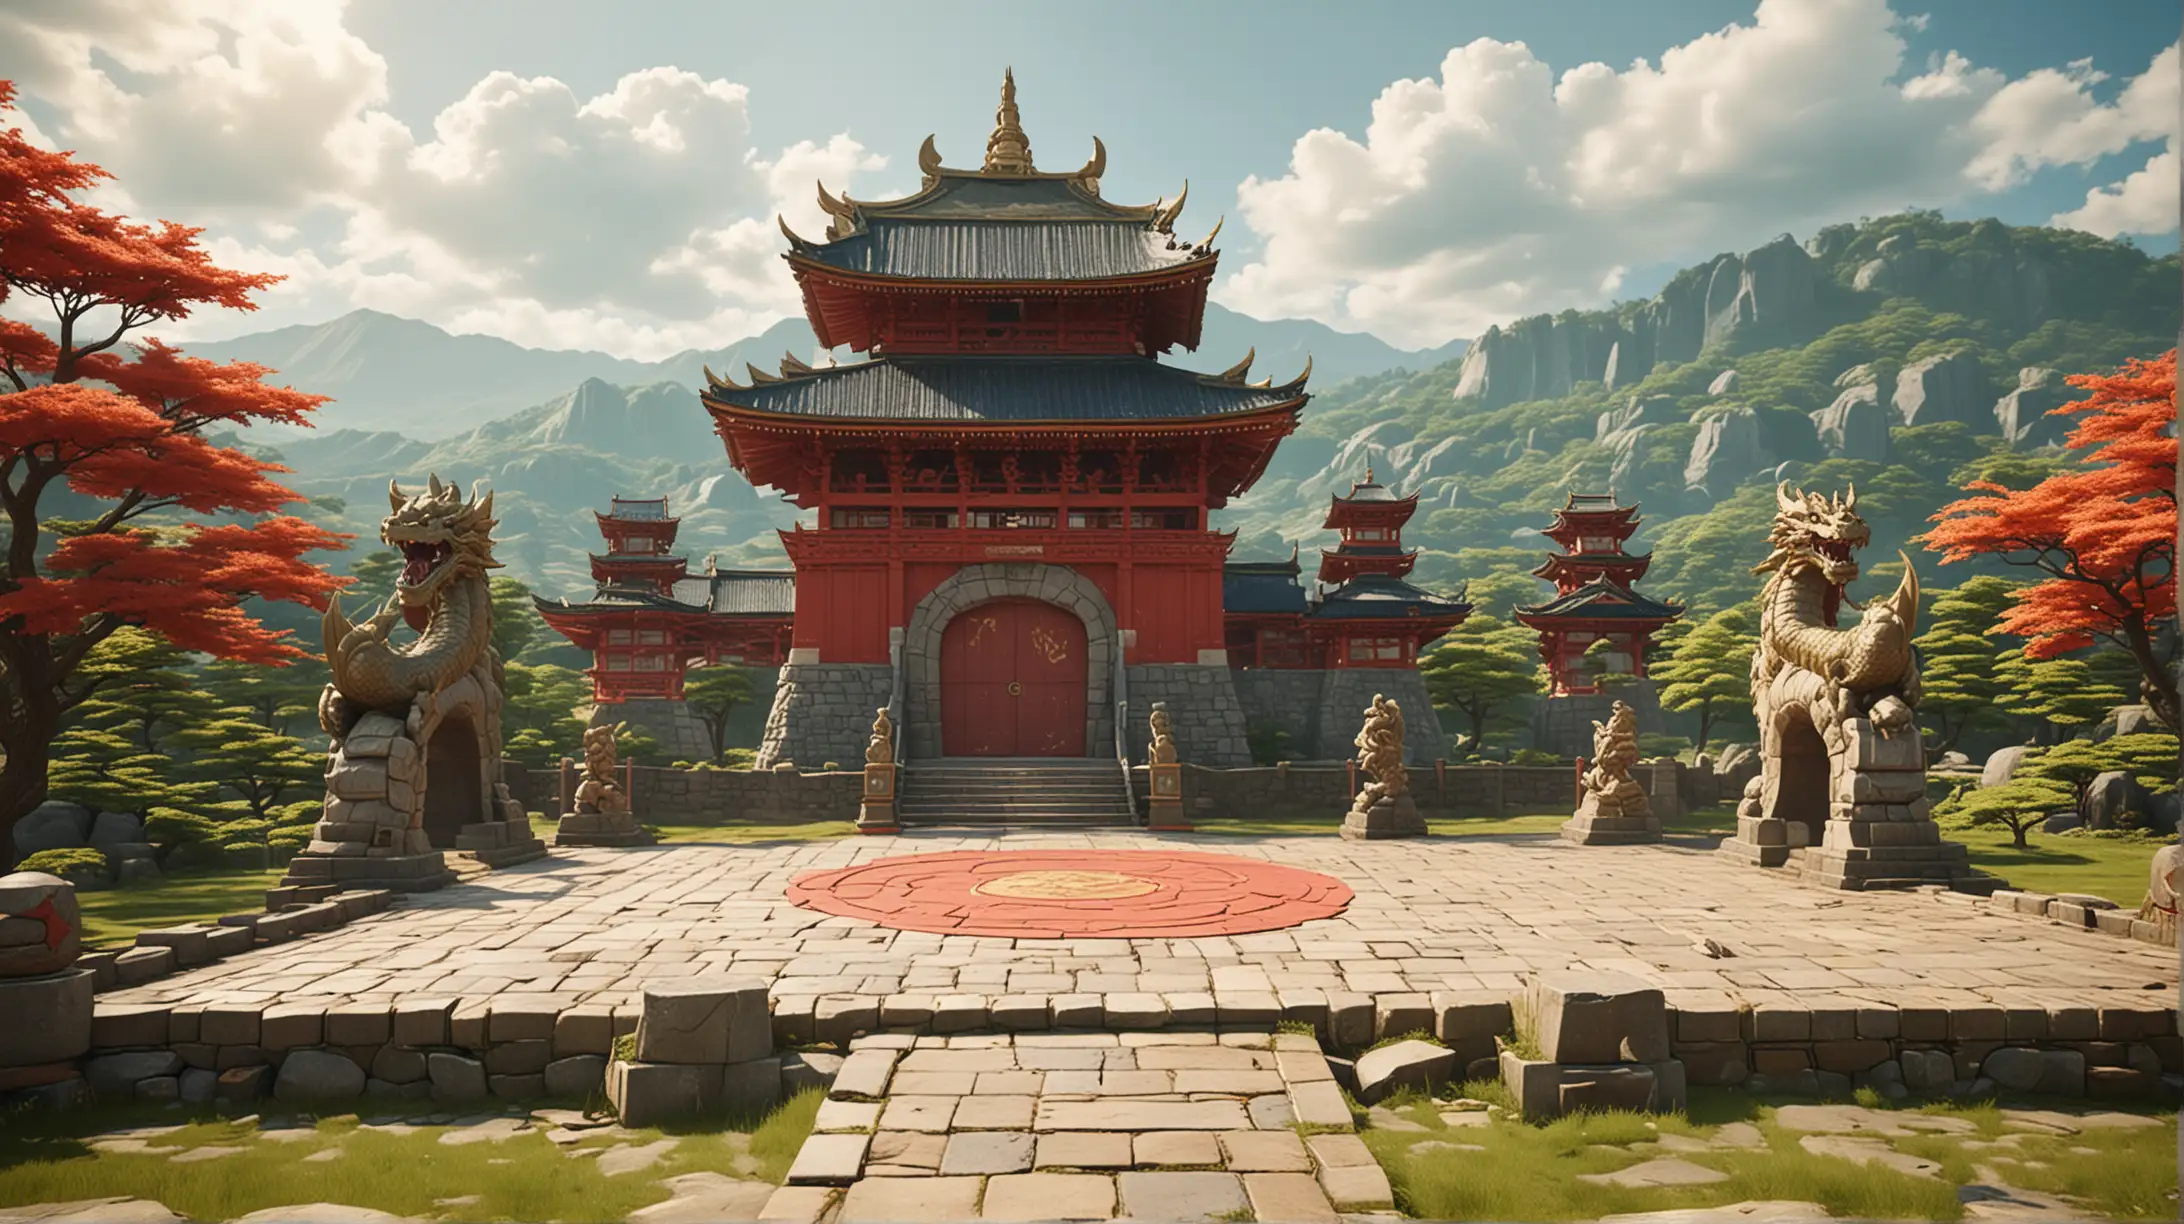 Fighting game stage front view, a stone martial arts arena with dragon-shaped sculptures standing upright, a mystical Japanese red and gold castle in the distance,  In an open square with lush green plains, 